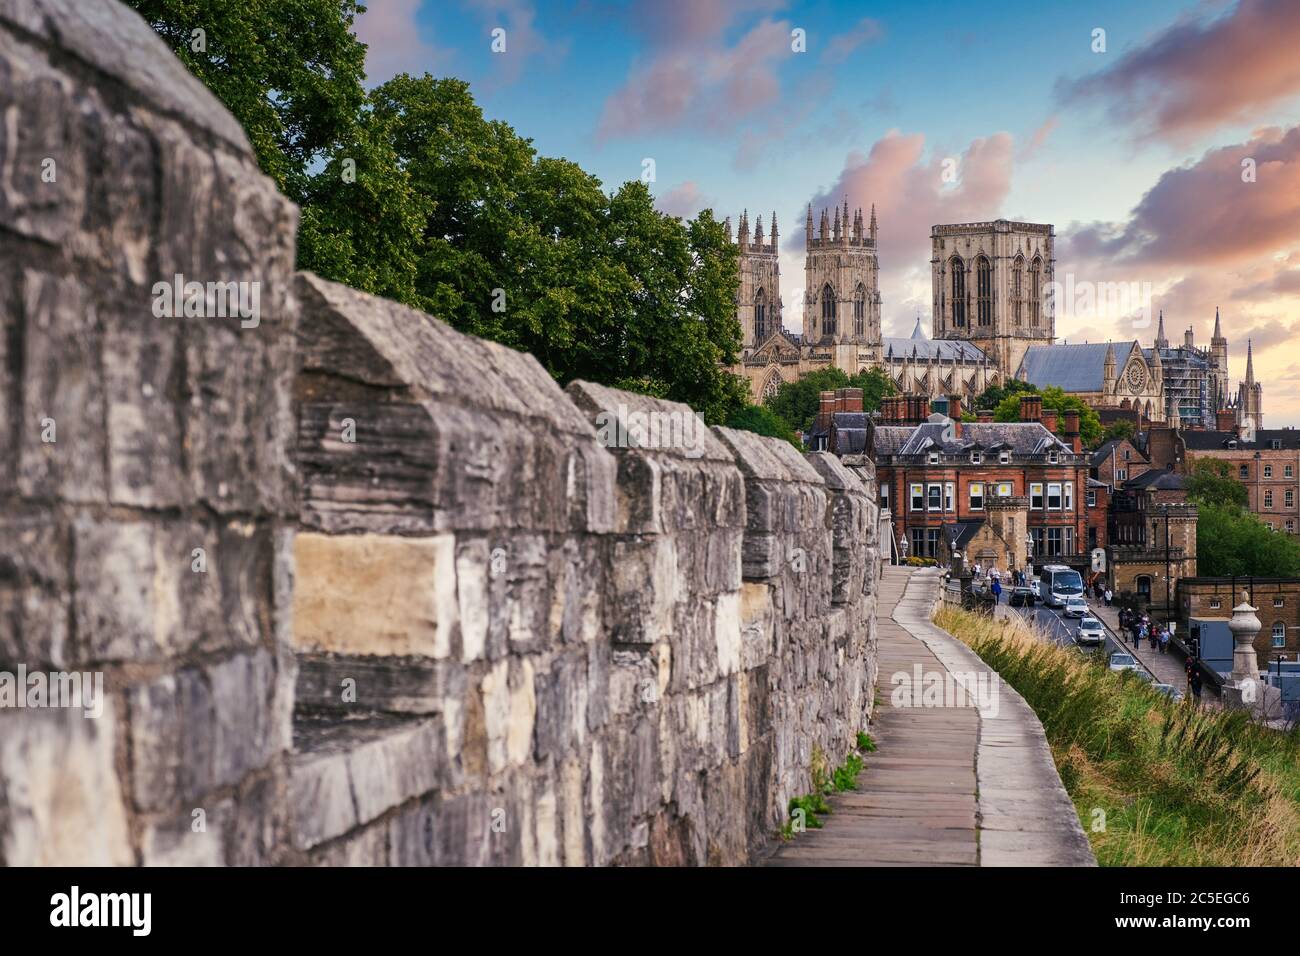 The city of York, its medieval wall and the York Minster at sunset Stock Photo